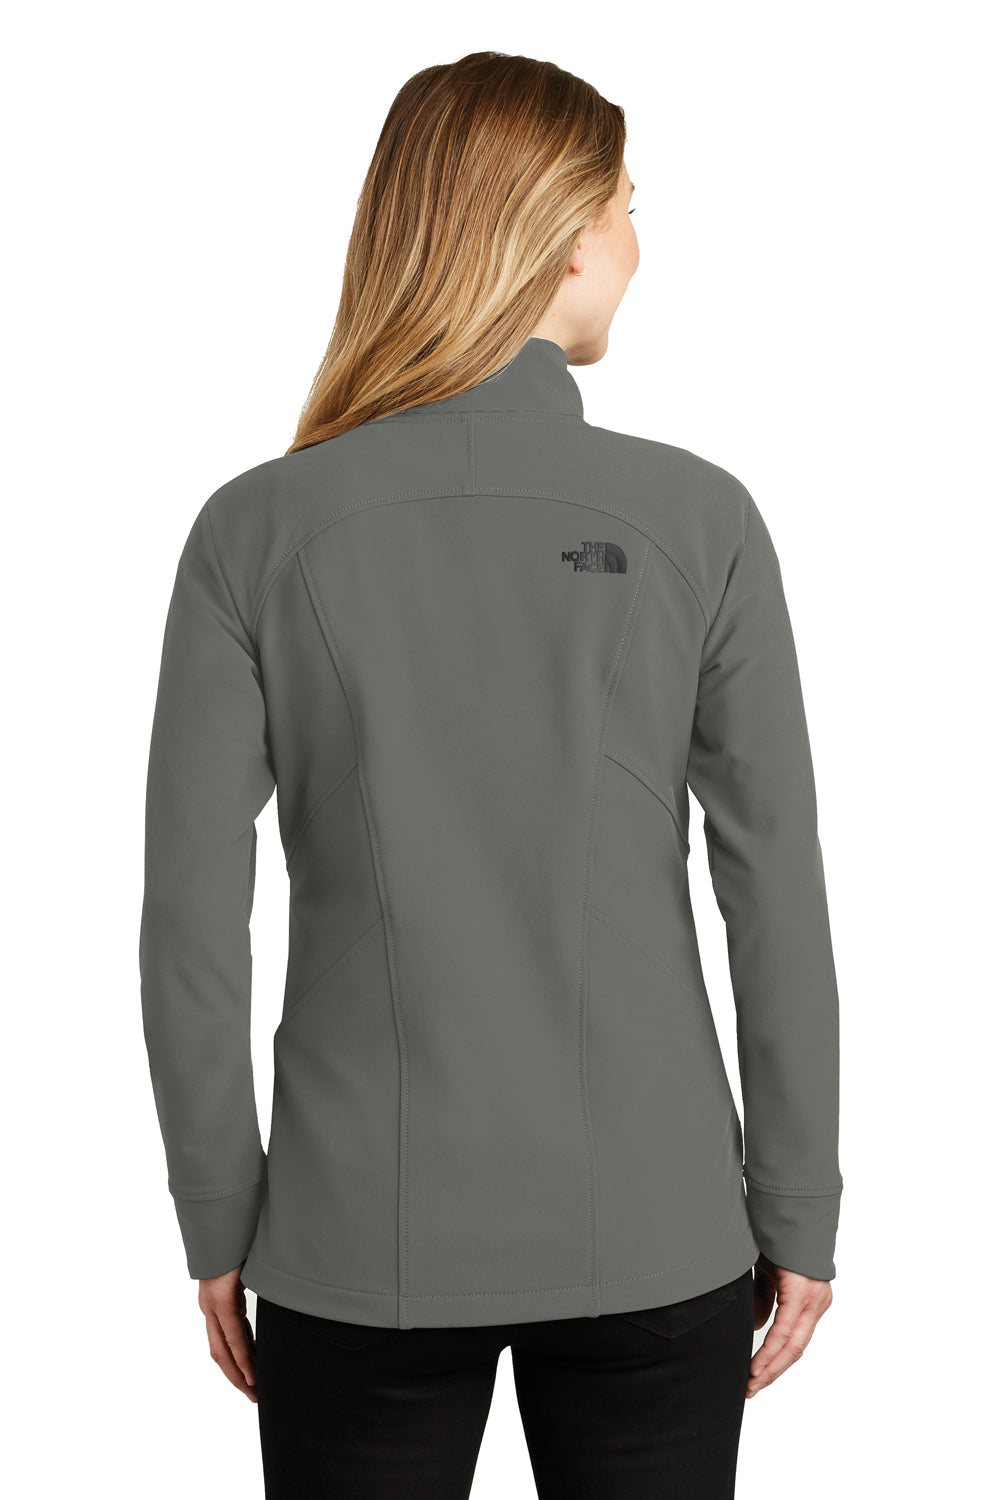 The North Face NF0A3LGW Womens Tech Wind & Water Resistant Full Zip Jacket Asphalt Grey Back